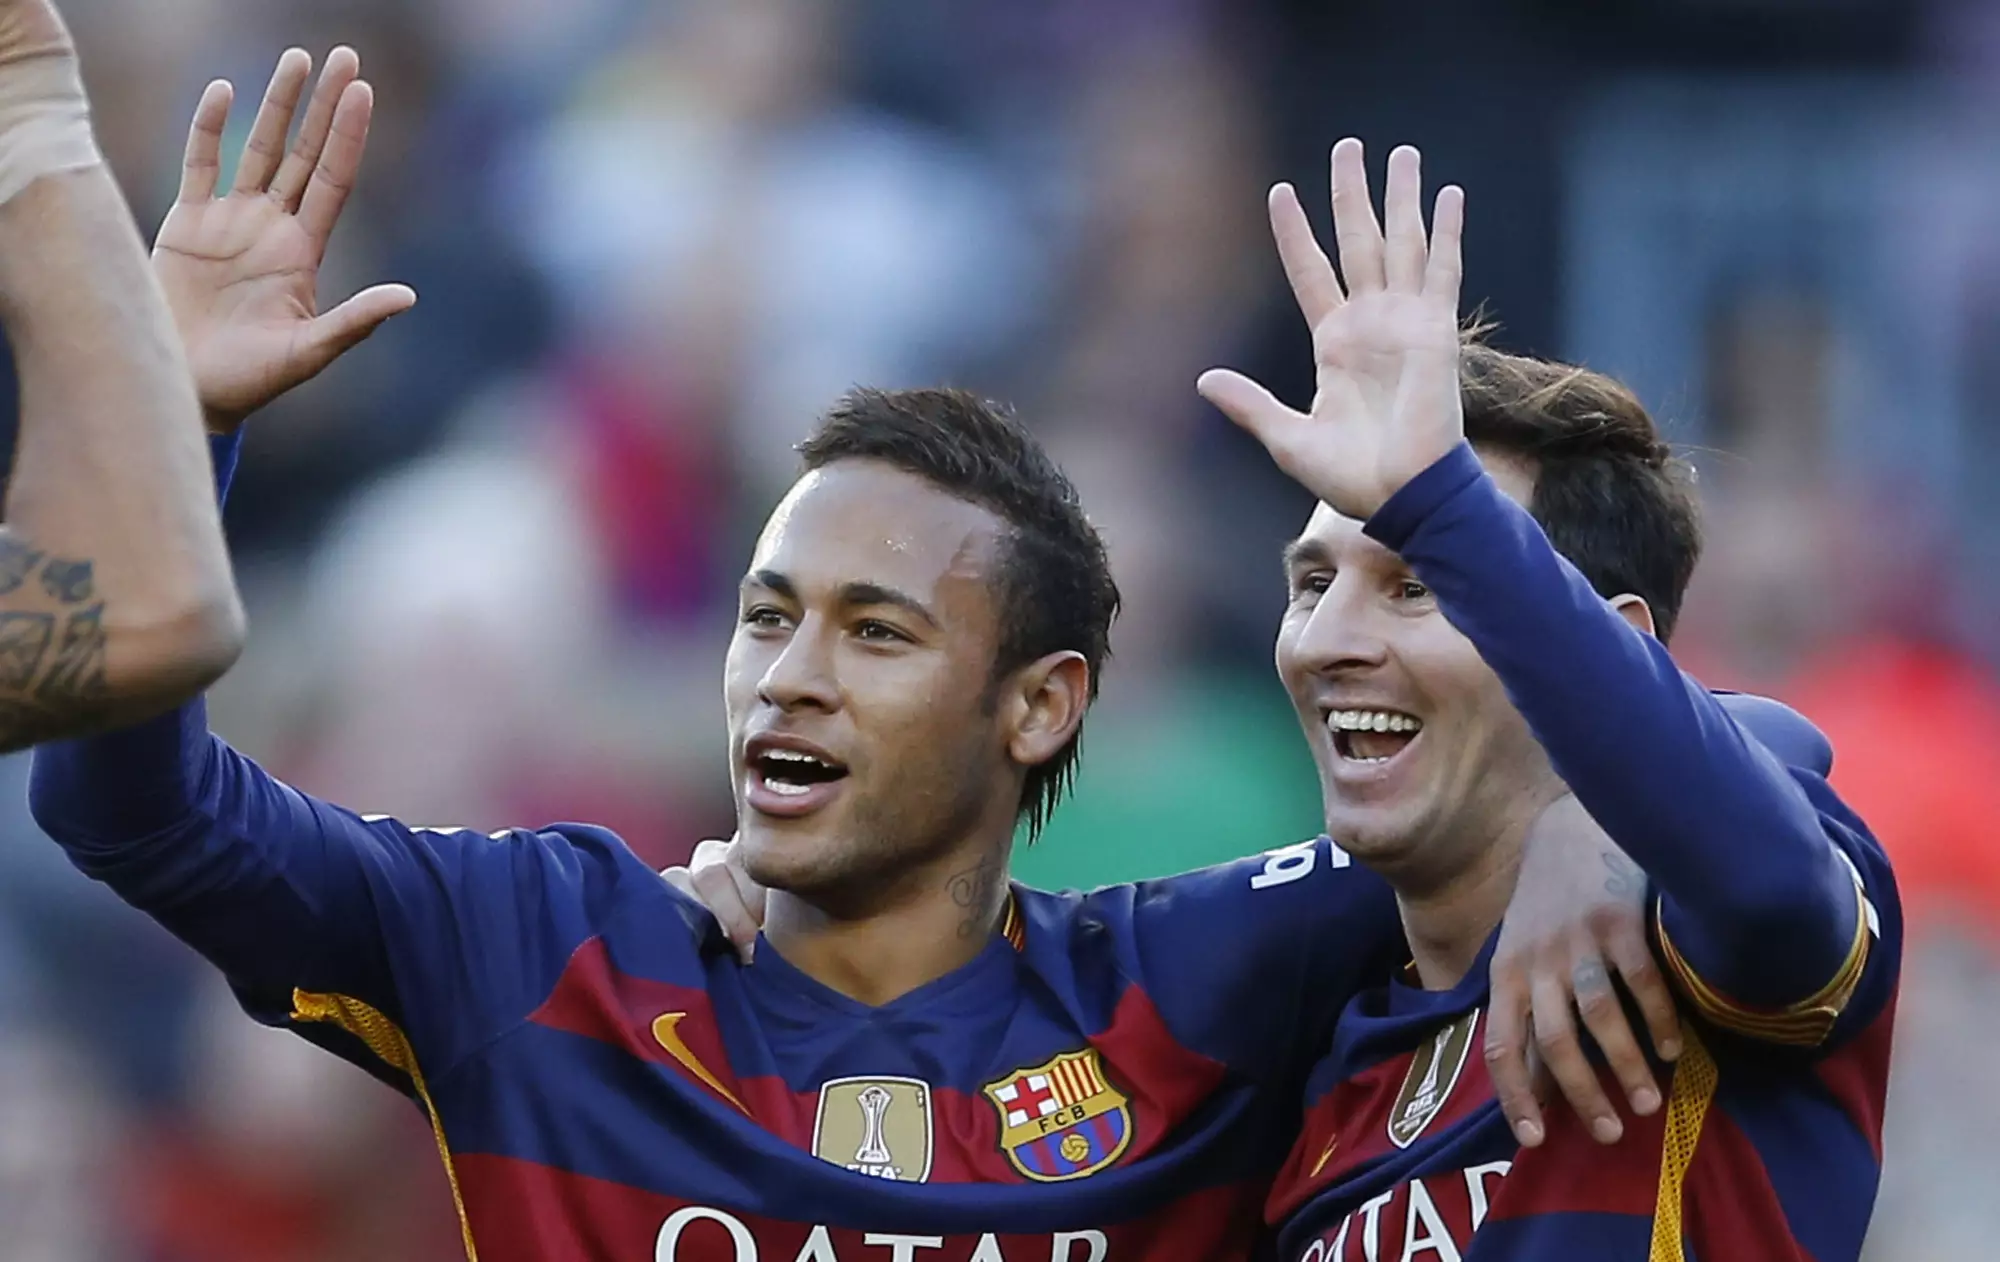 Could Messi and Neymar be reunited this summer? Image: PA Images